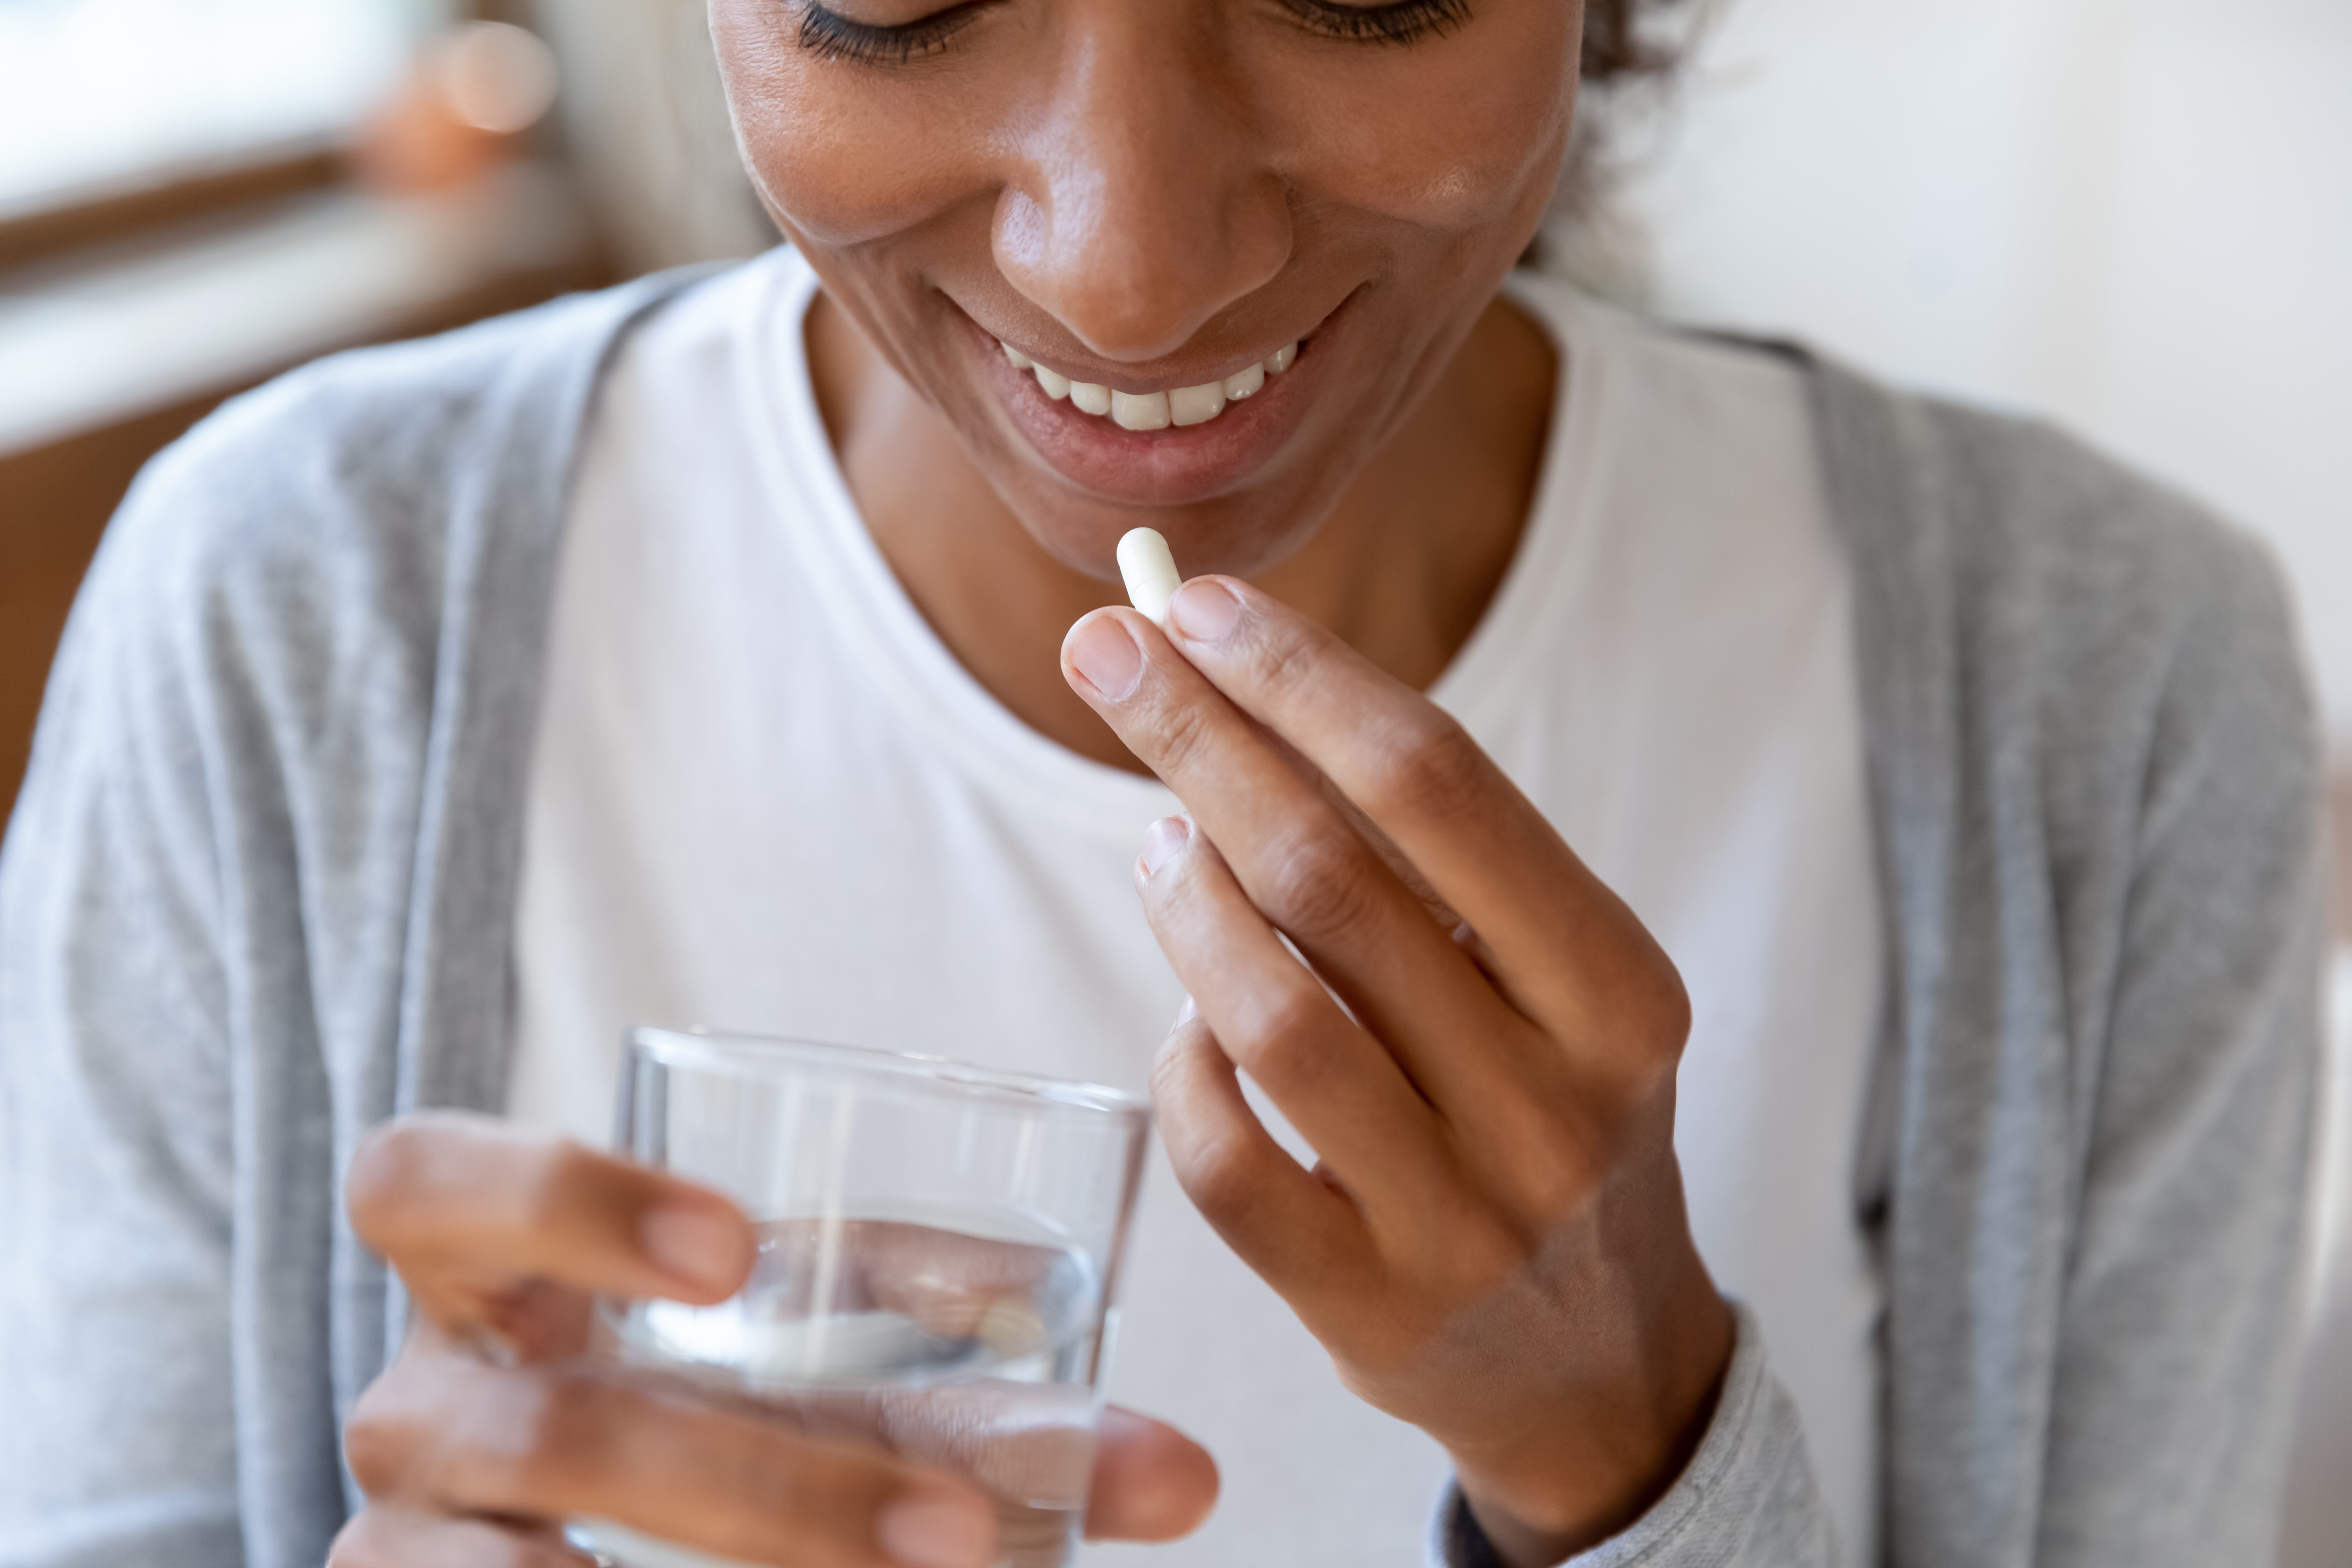 Black woman taking pill while smiling